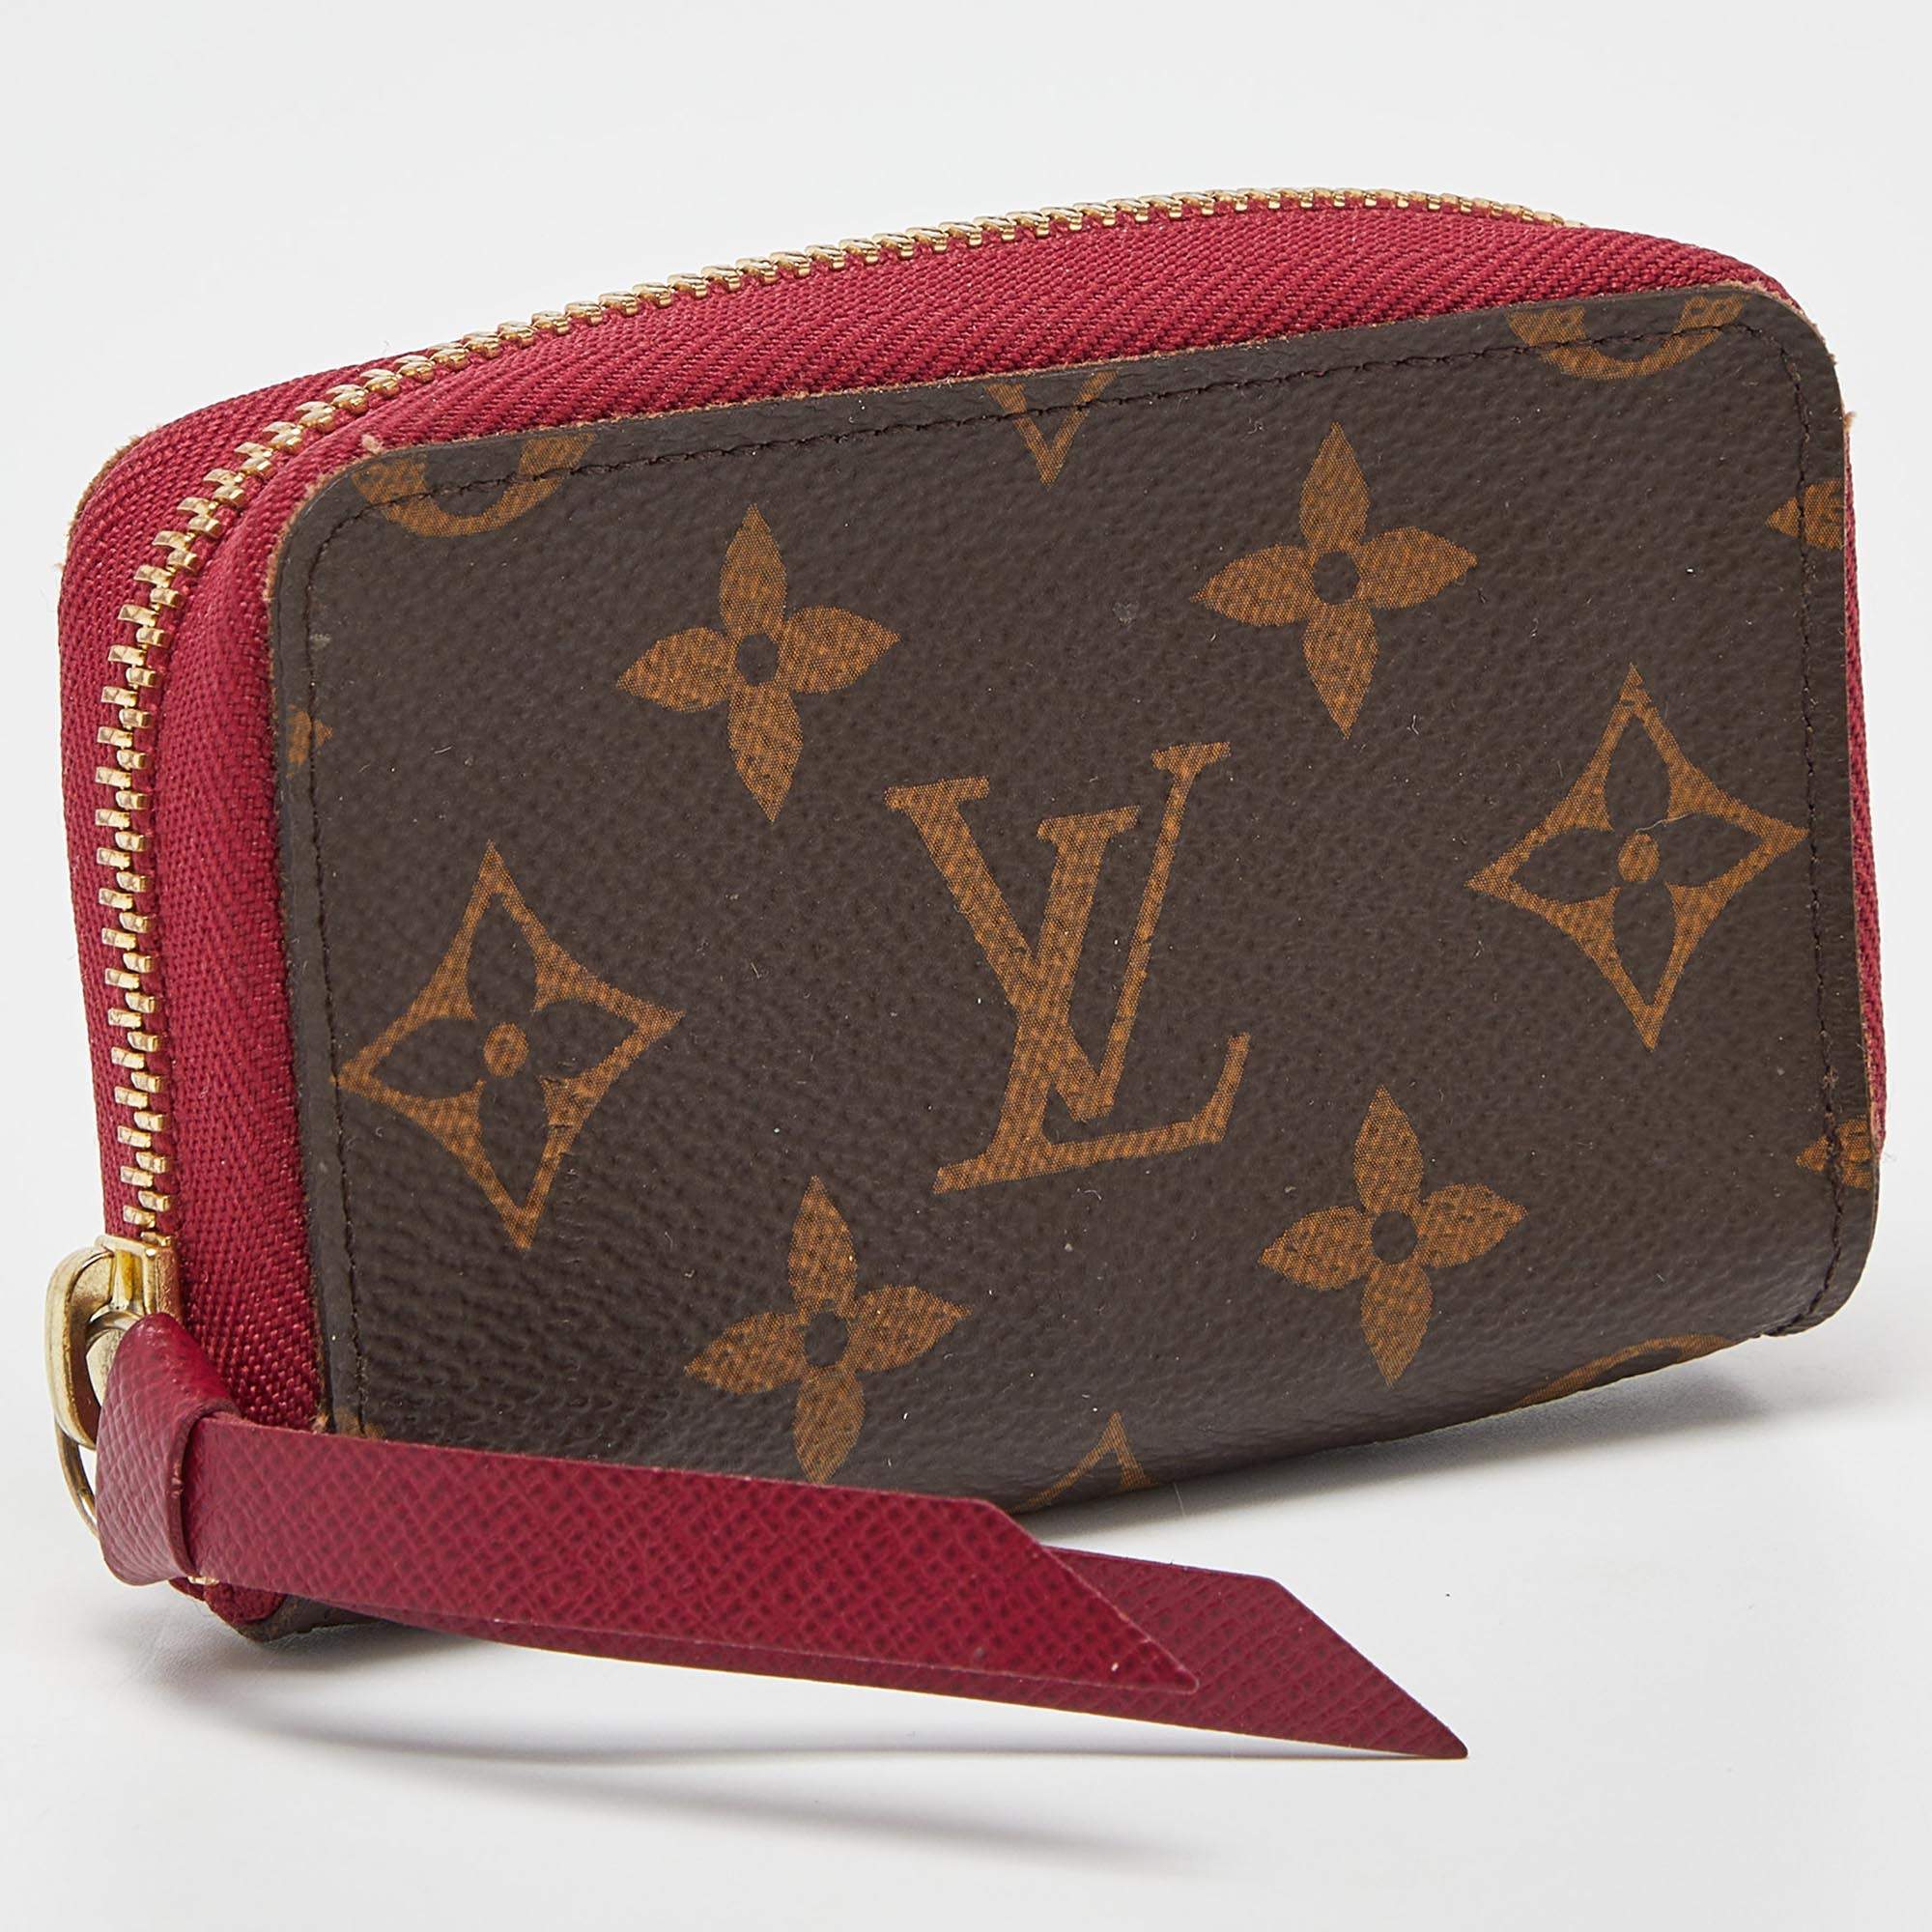 Products by Louis Vuitton: Zippy Coin Purse  Louis vuitton wallet, Louis  vuitton purse, Louis vuitton bag